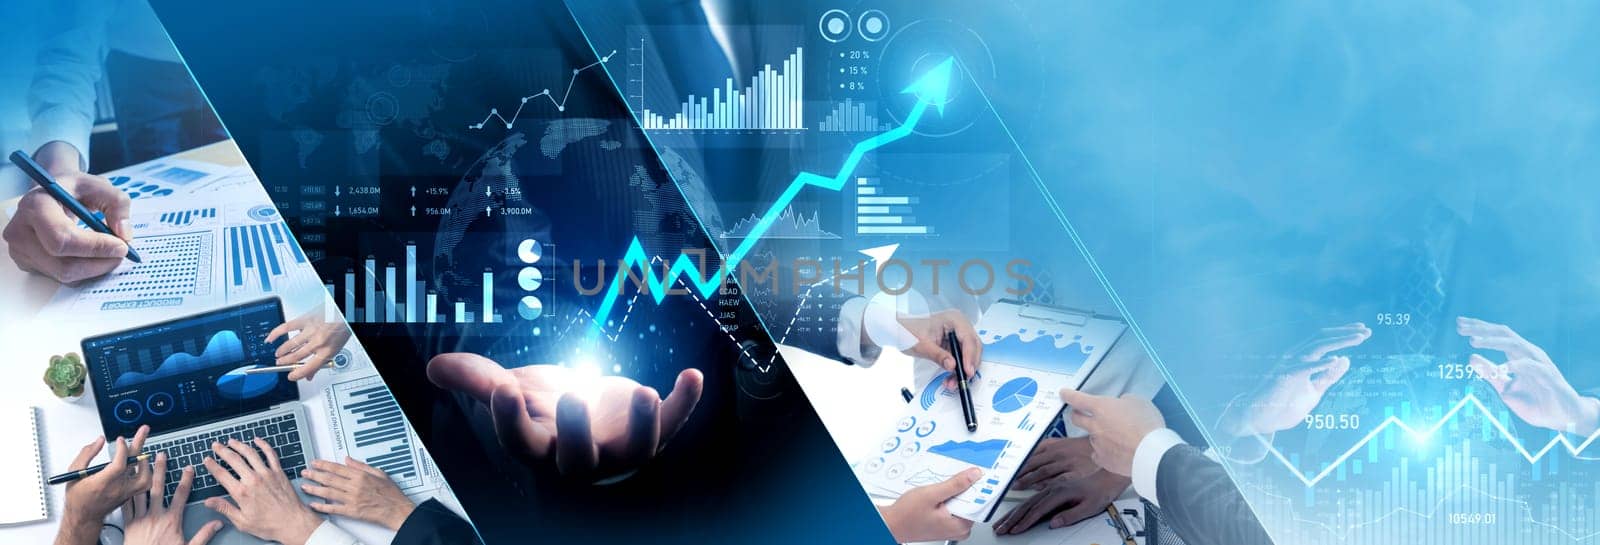 Futuristic business digital financial data technology concept for future big data analytic and business intelligence research for businessman analyst invest decisions making panoramic banner vexel